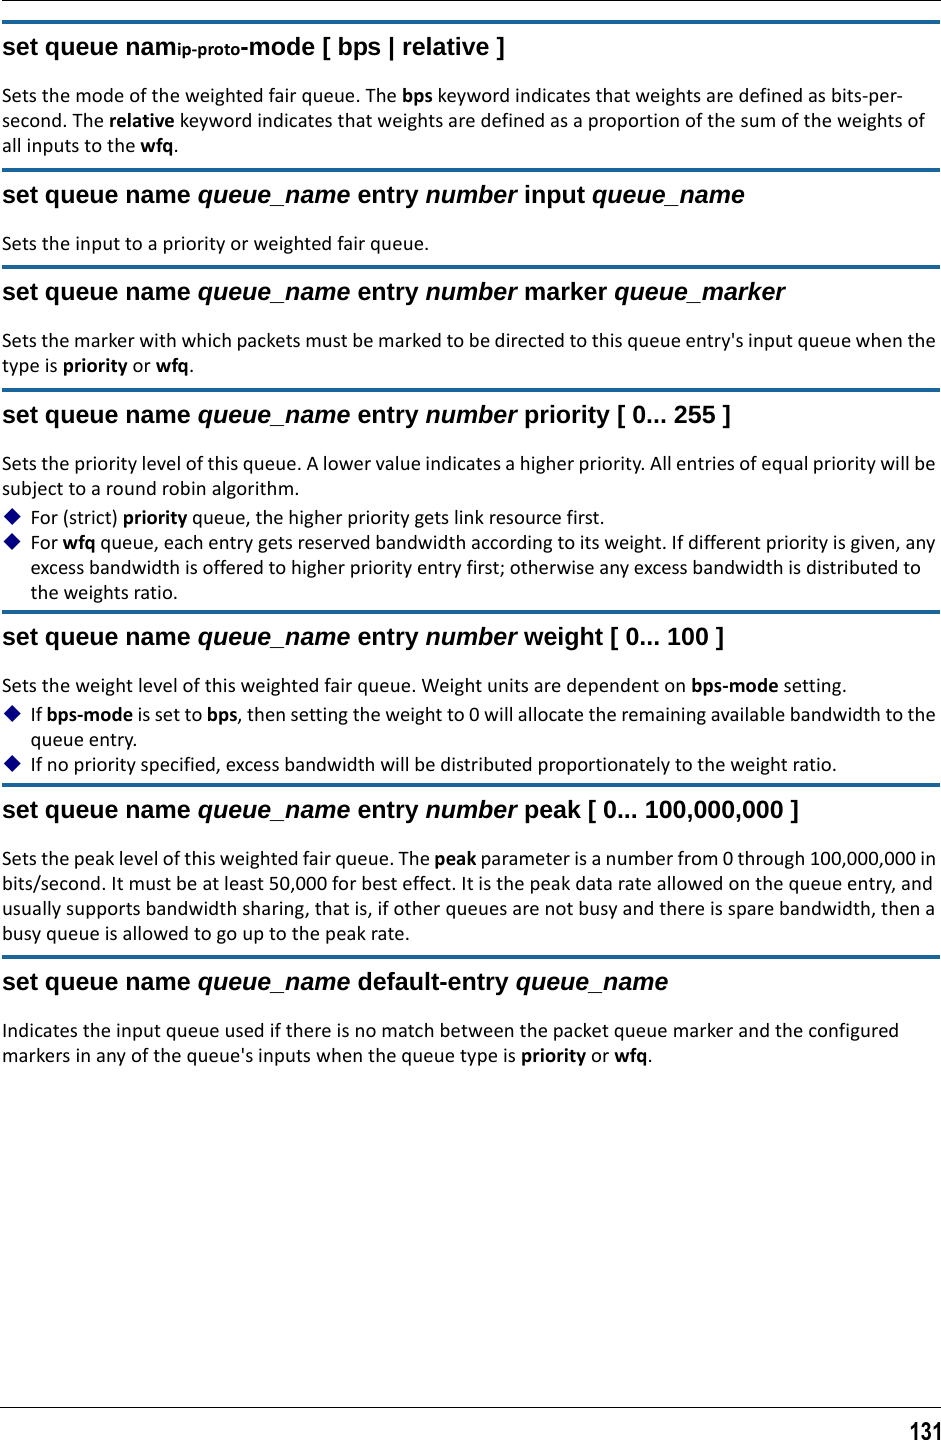 131set queue namip-proto-mode [ bps | relative ]Sets the mode of the weighted fair queue. The bps keyword indicates that weights are defined as bits-per-second. The relative keyword indicates that weights are defined as a proportion of the sum of the weights of all inputs to the wfq.set queue name queue_name entry number input queue_nameSets the input to a priority or weighted fair queue.set queue name queue_name entry number marker queue_markerSets the marker with which packets must be marked to be directed to this queue entry&apos;s input queue when the type is priority or wfq.set queue name queue_name entry number priority [ 0... 255 ]Sets the priority level of this queue. A lower value indicates a higher priority. All entries of equal priority will be subject to a round robin algorithm.For (strict) priority queue, the higher priority gets link resource first.For wfq queue, each entry gets reserved bandwidth according to its weight. If different priority is given, any excess bandwidth is offered to higher priority entry first; otherwise any excess bandwidth is distributed to the weights ratio.set queue name queue_name entry number weight [ 0... 100 ]Sets the weight level of this weighted fair queue. Weight units are dependent on bps-mode setting. If bps-mode is set to bps, then setting the weight to 0 will allocate the remaining available bandwidth to the queue entry. If no priority specified, excess bandwidth will be distributed proportionately to the weight ratio.set queue name queue_name entry number peak [ 0... 100,000,000 ]Sets the peak level of this weighted fair queue. The peak parameter is a number from 0 through 100,000,000 in bits/second. It must be at least 50,000 for best effect. It is the peak data rate allowed on the queue entry, and usually supports bandwidth sharing, that is, if other queues are not busy and there is spare bandwidth, then a busy queue is allowed to go up to the peak rate.set queue name queue_name default-entry queue_nameIndicates the input queue used if there is no match between the packet queue marker and the configured markers in any of the queue&apos;s inputs when the queue type is priority or wfq.